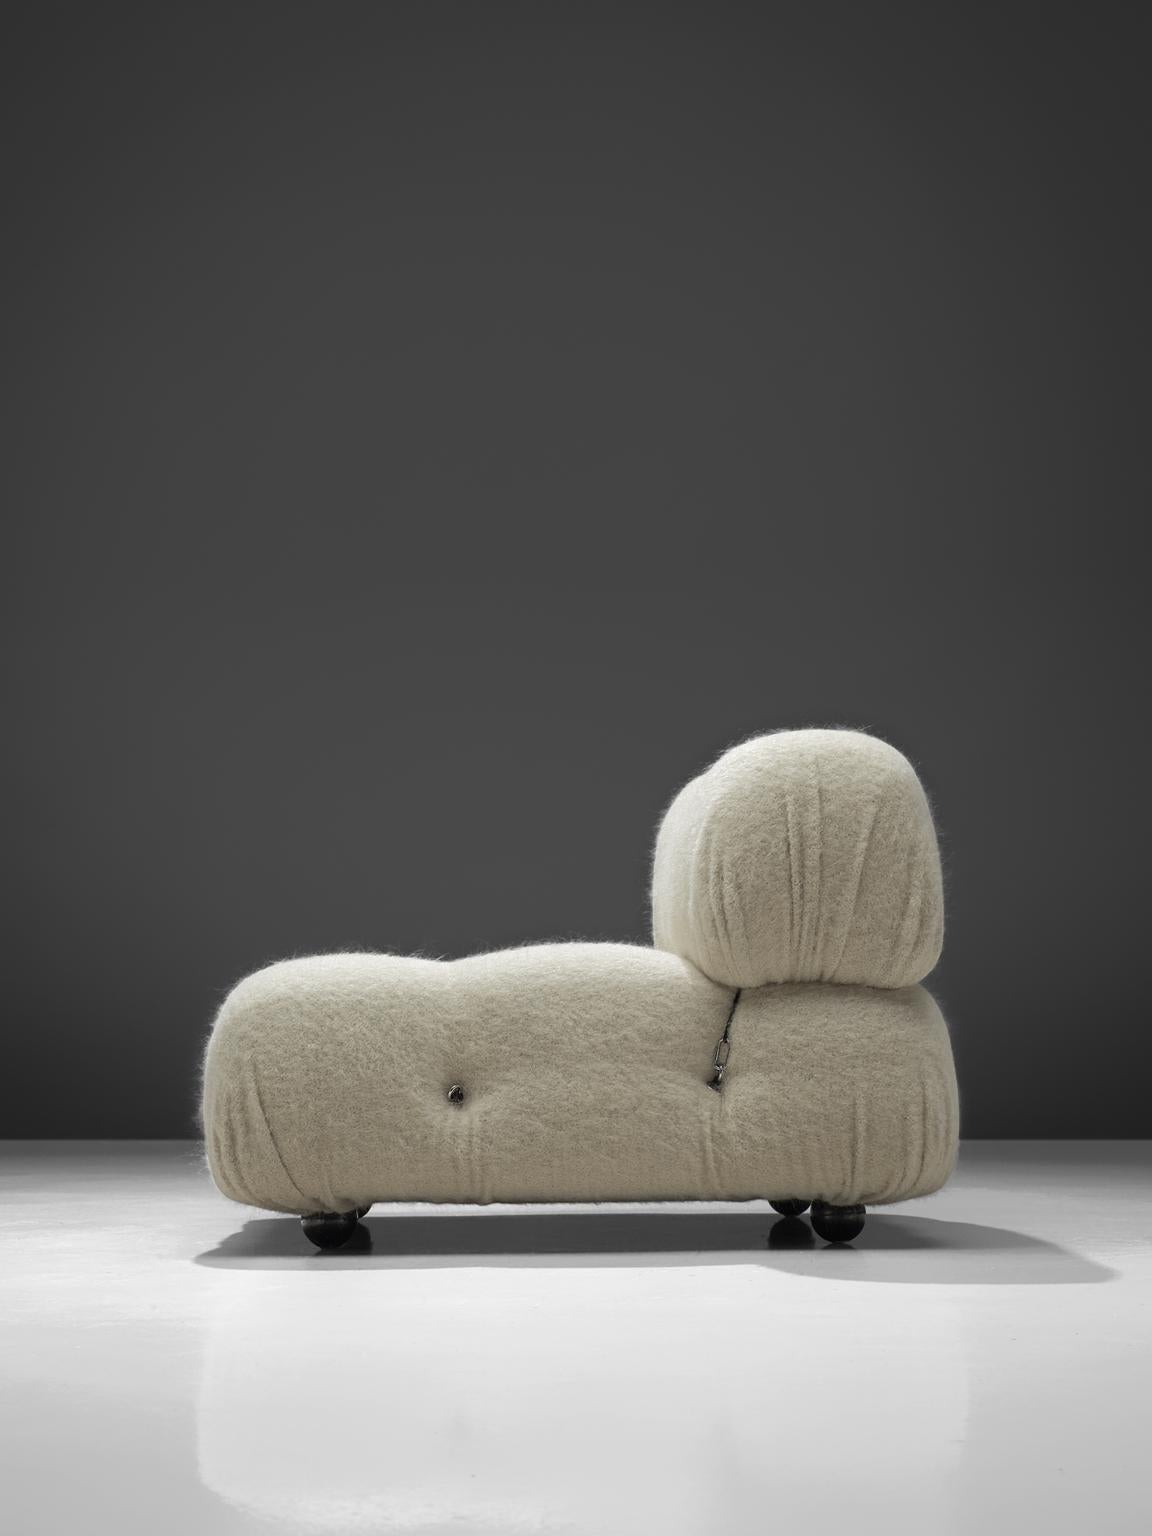 Mario Bellini, 'Camaleonda' sofa, in white Pierre Frey wool-mix upholstery, Italy, 1972.

This element is made on request in our upholstery atelier and consists of one large elements and one back rests. The back is provided with rings and